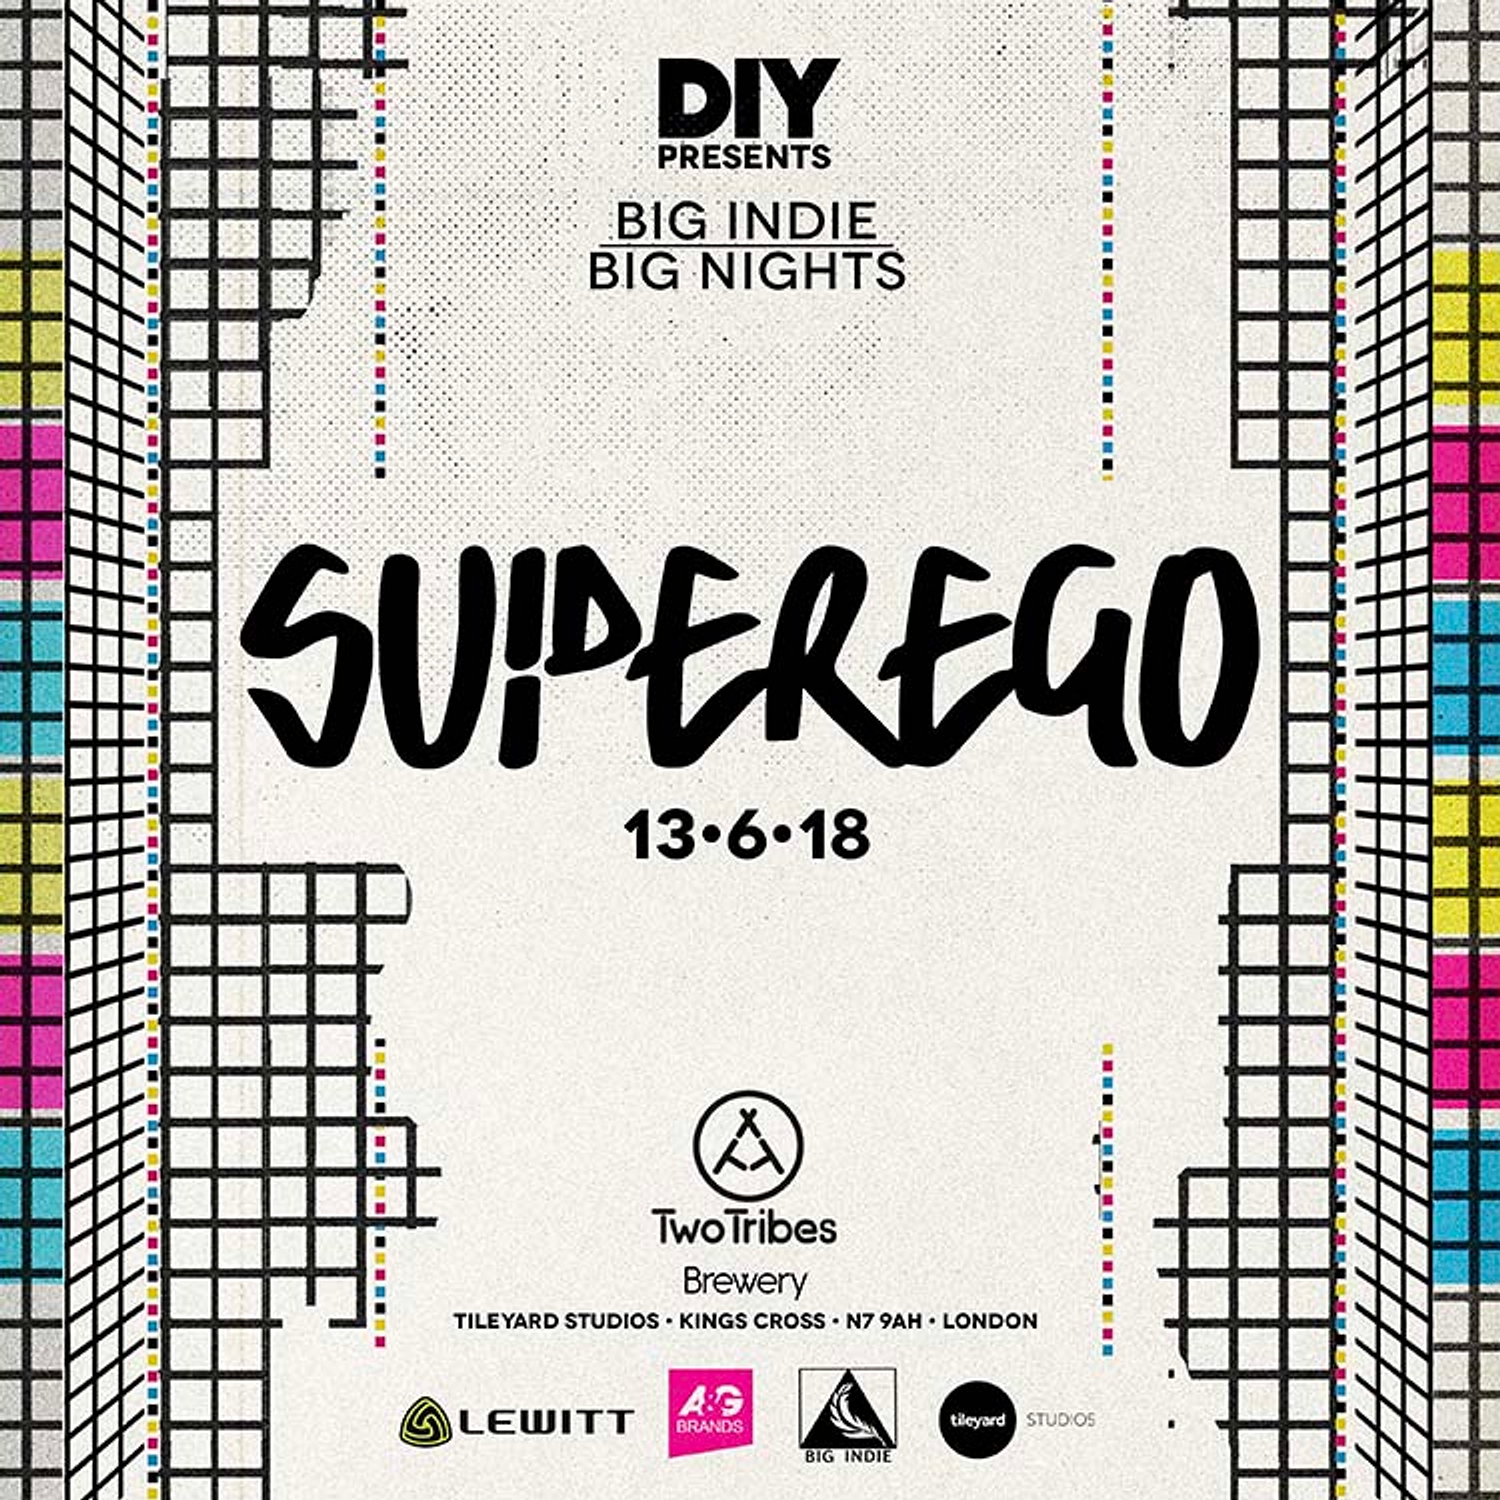 Grab your tickets for the next Big Indie Big Nights event with Superego now!